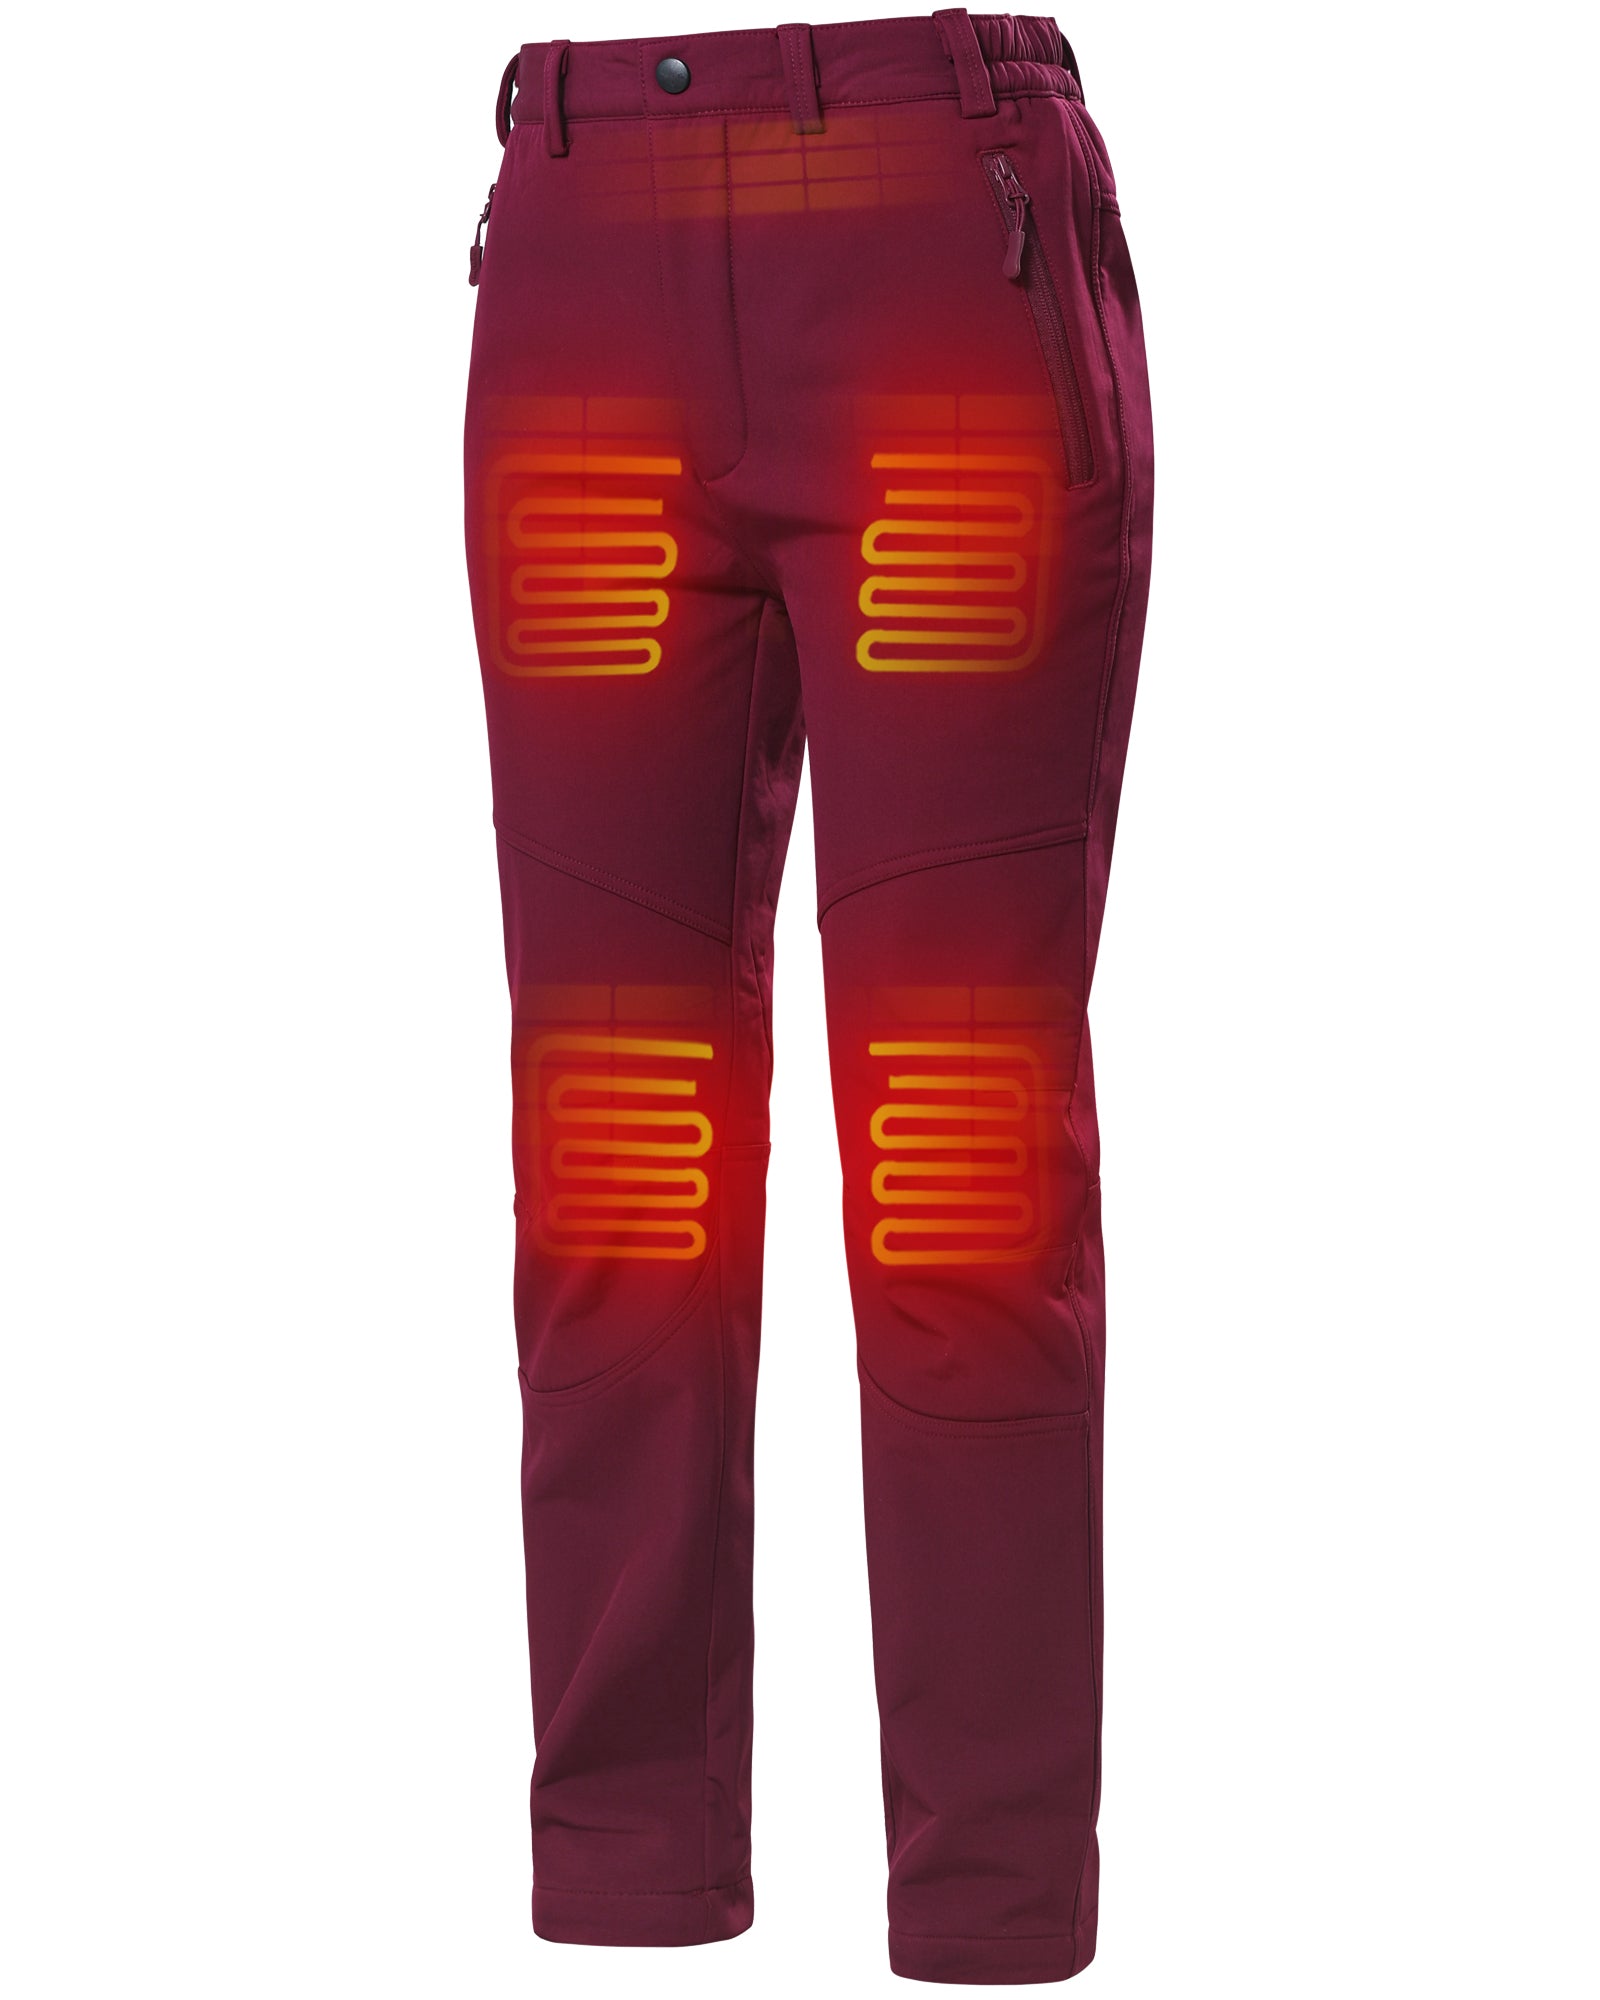 Heated Pants and Shirt – Set  USB rechargeable - Comfort-Producten